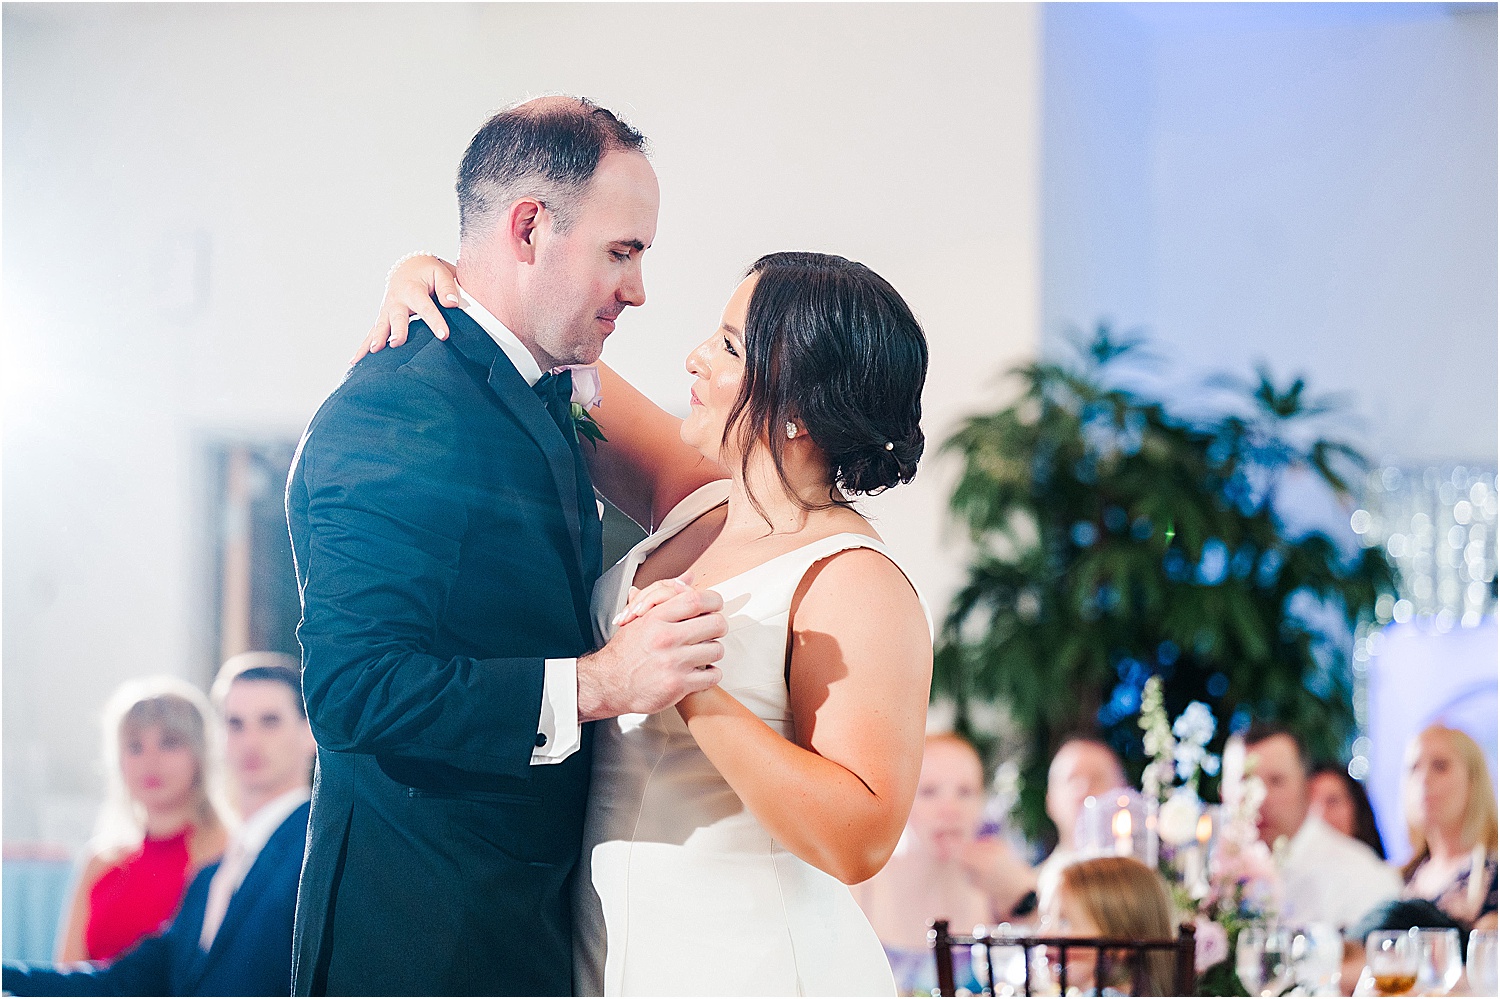 First dance wedding couple • Wild Weather - Love at a Phipps Conservatory Outdoor Garden Wedding